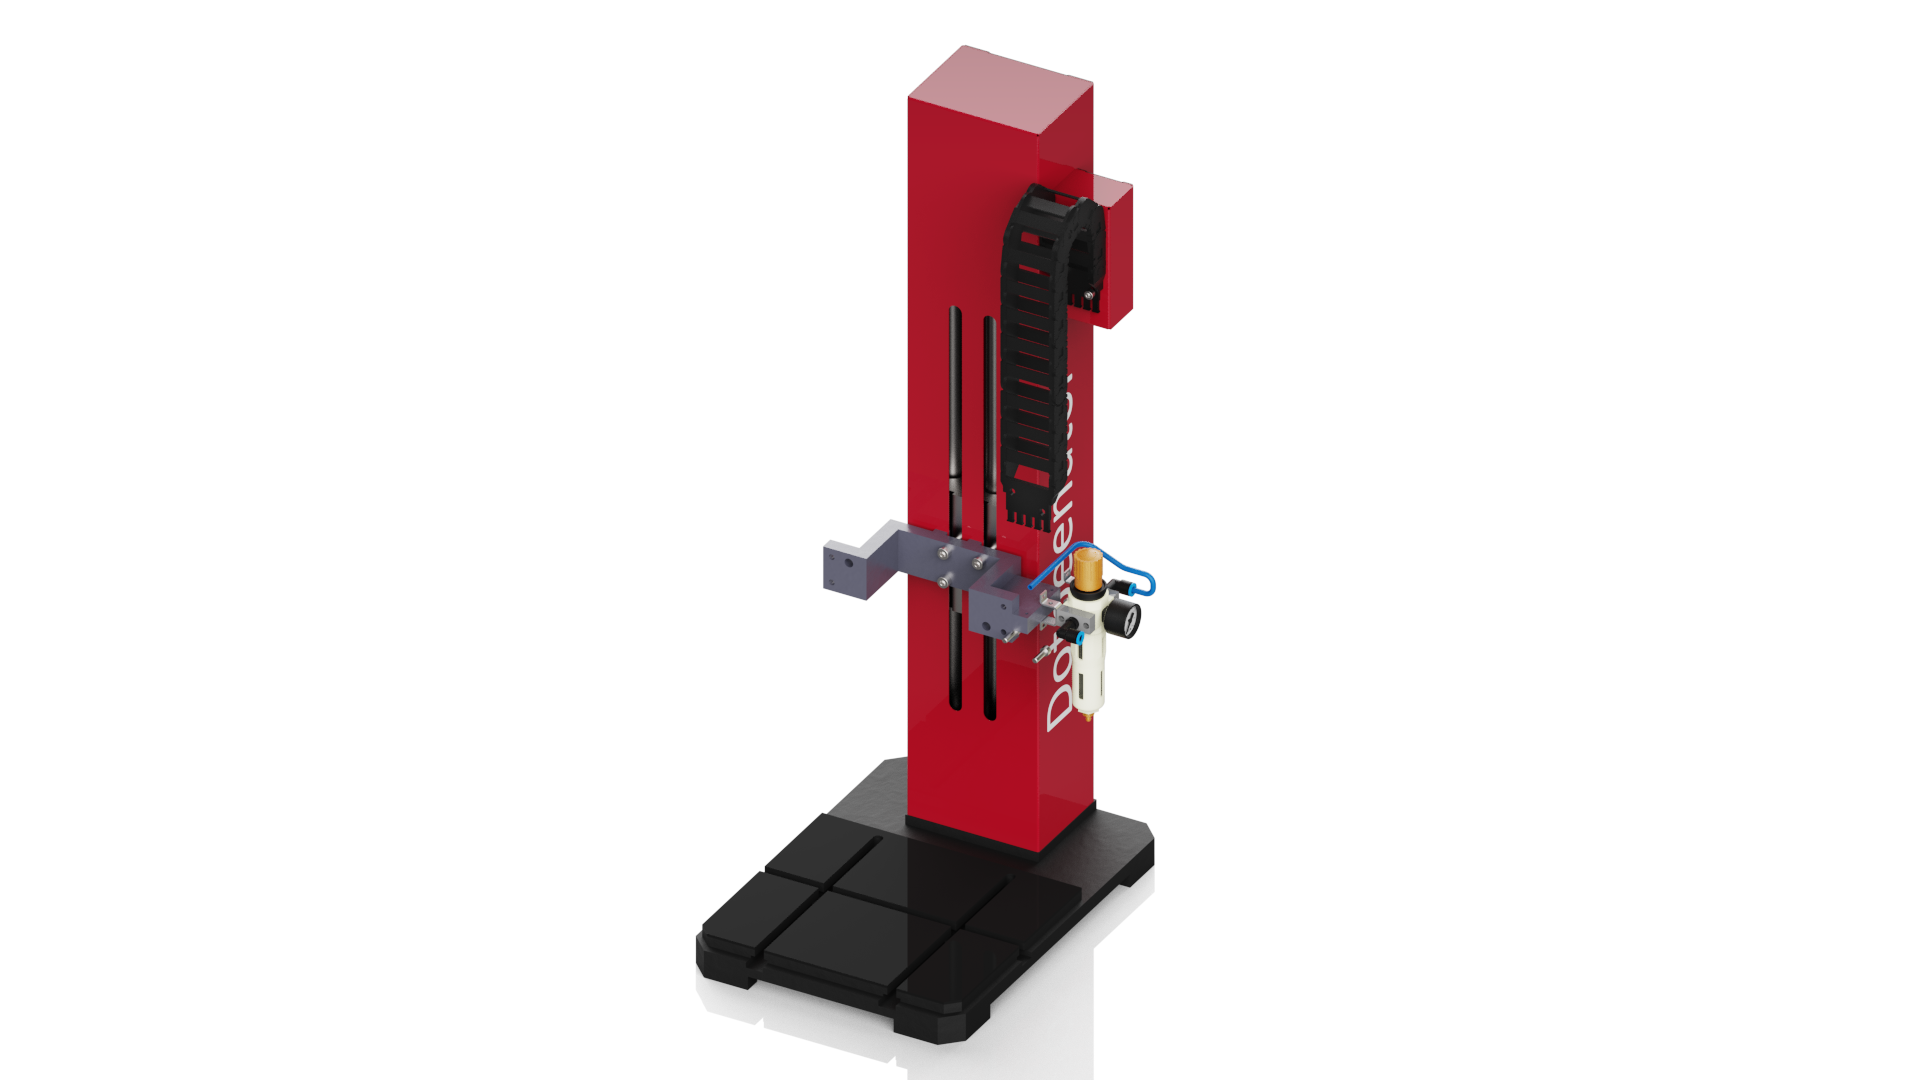 Motorized Z Axis for benchtop dot peen marking machines